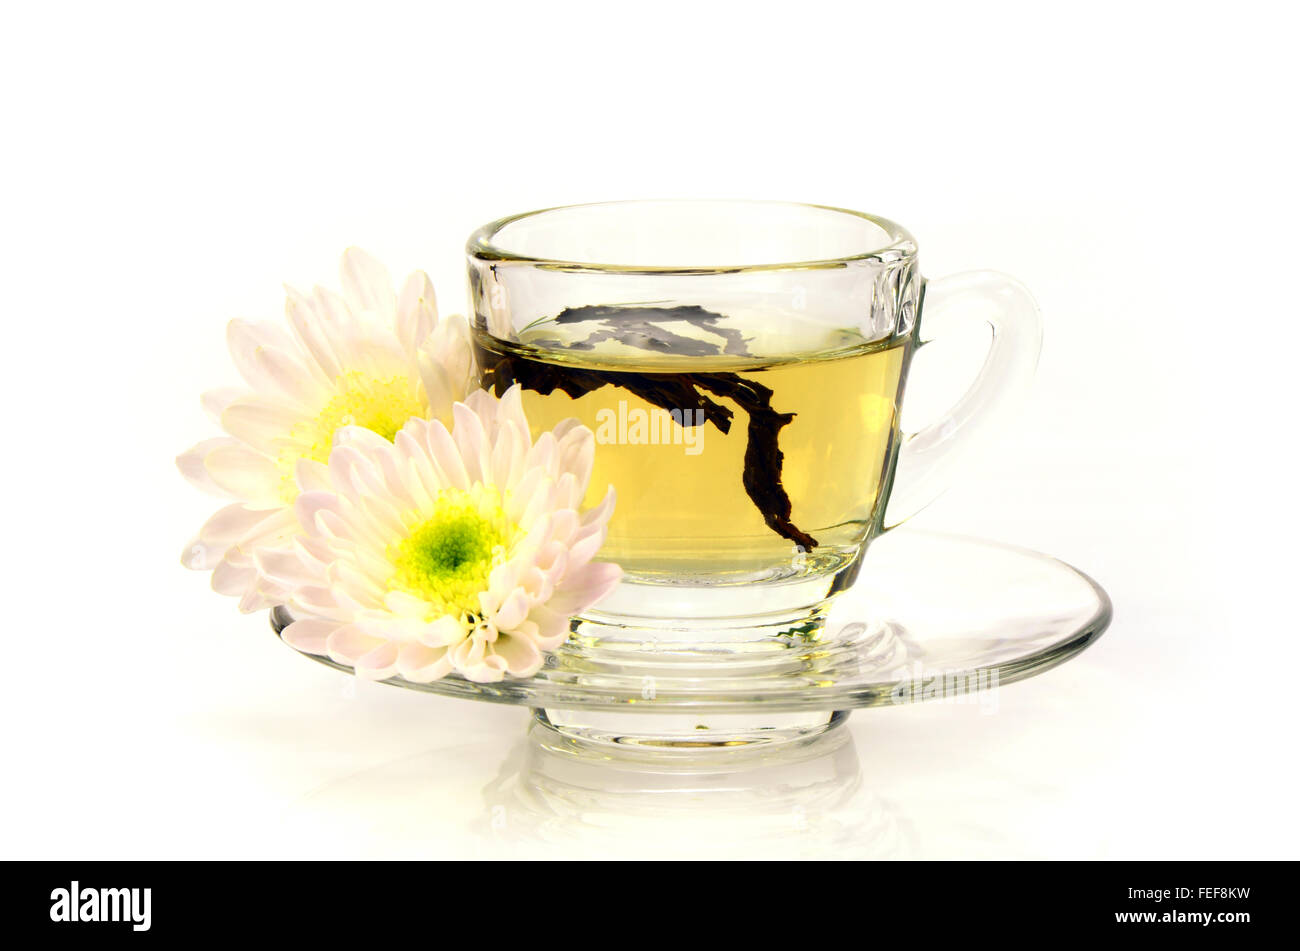 Chinese Tea with Chinese Herbal Medicine on White Background. Stock Photo